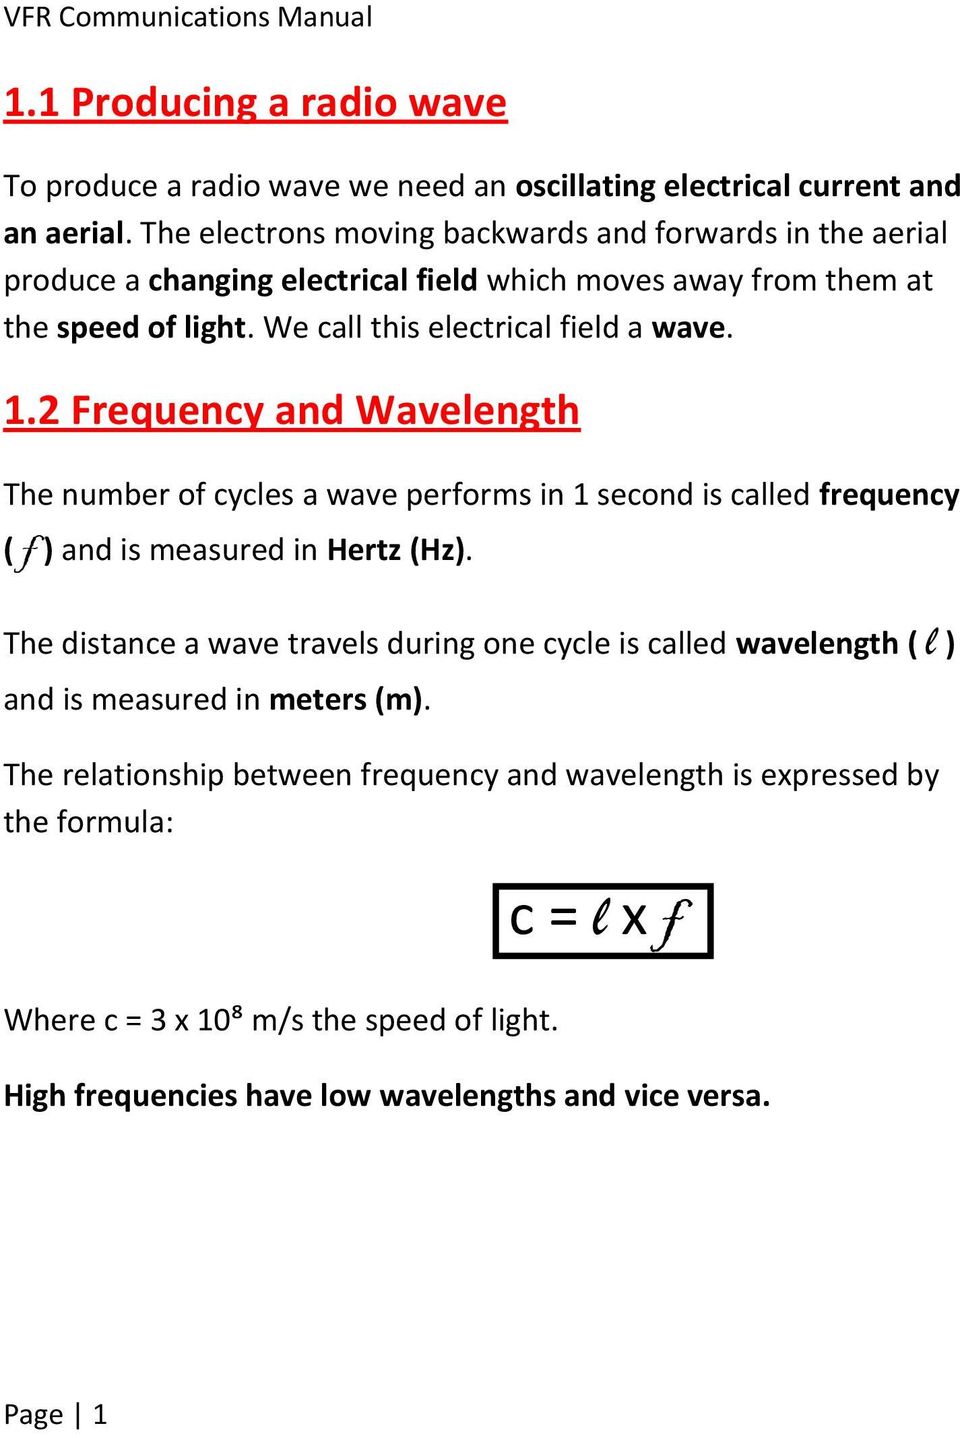 We call this electrical field a wave. 1.2 Frequency and Wavelength The number of cycles a wave performs in 1 second is called frequency ( f ) and is measured in Hertz (Hz).